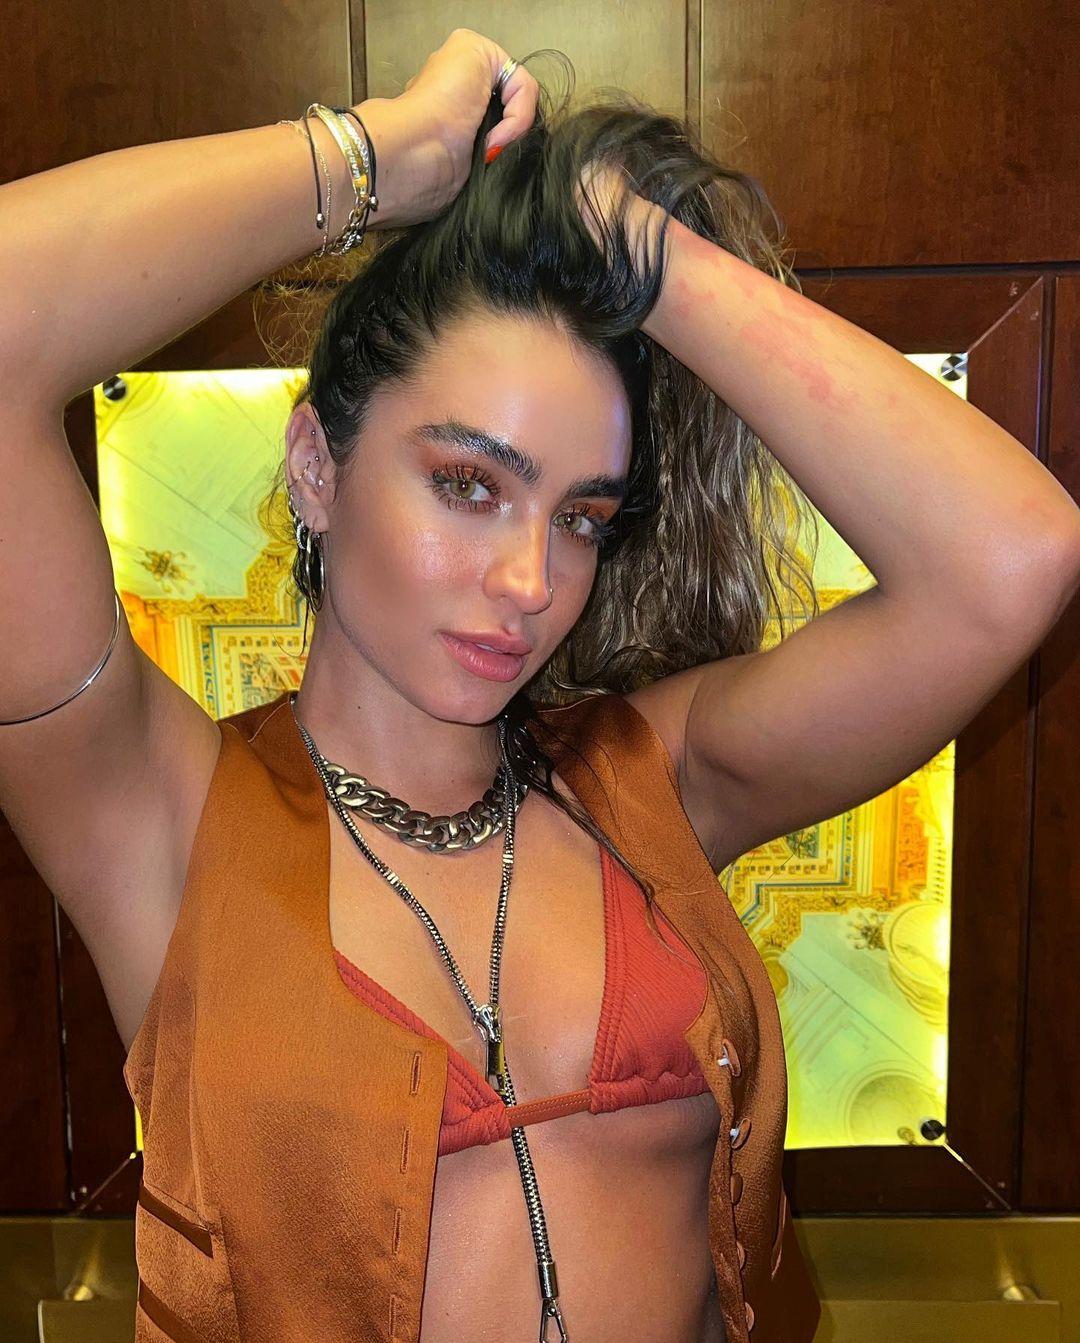 Sommer Ray posing for the camera.